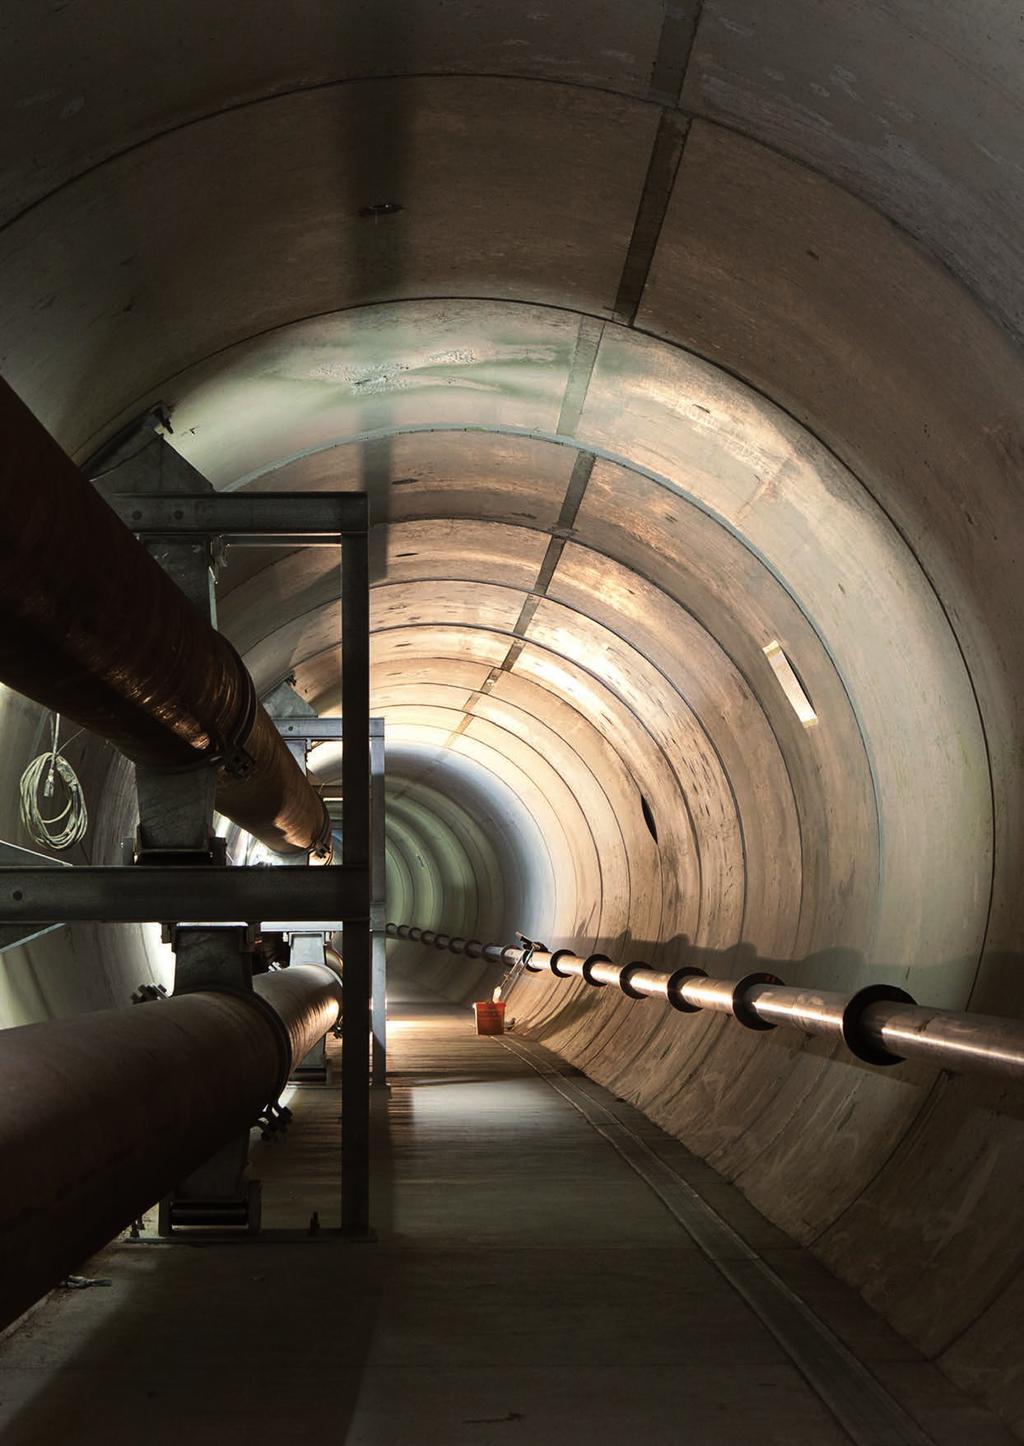 2 Comprehensive Microtunnelling Solutions A reliably functioning infrastructure which meets the needs of both private citizens and the economy is an essential foundation for modern living spaces.